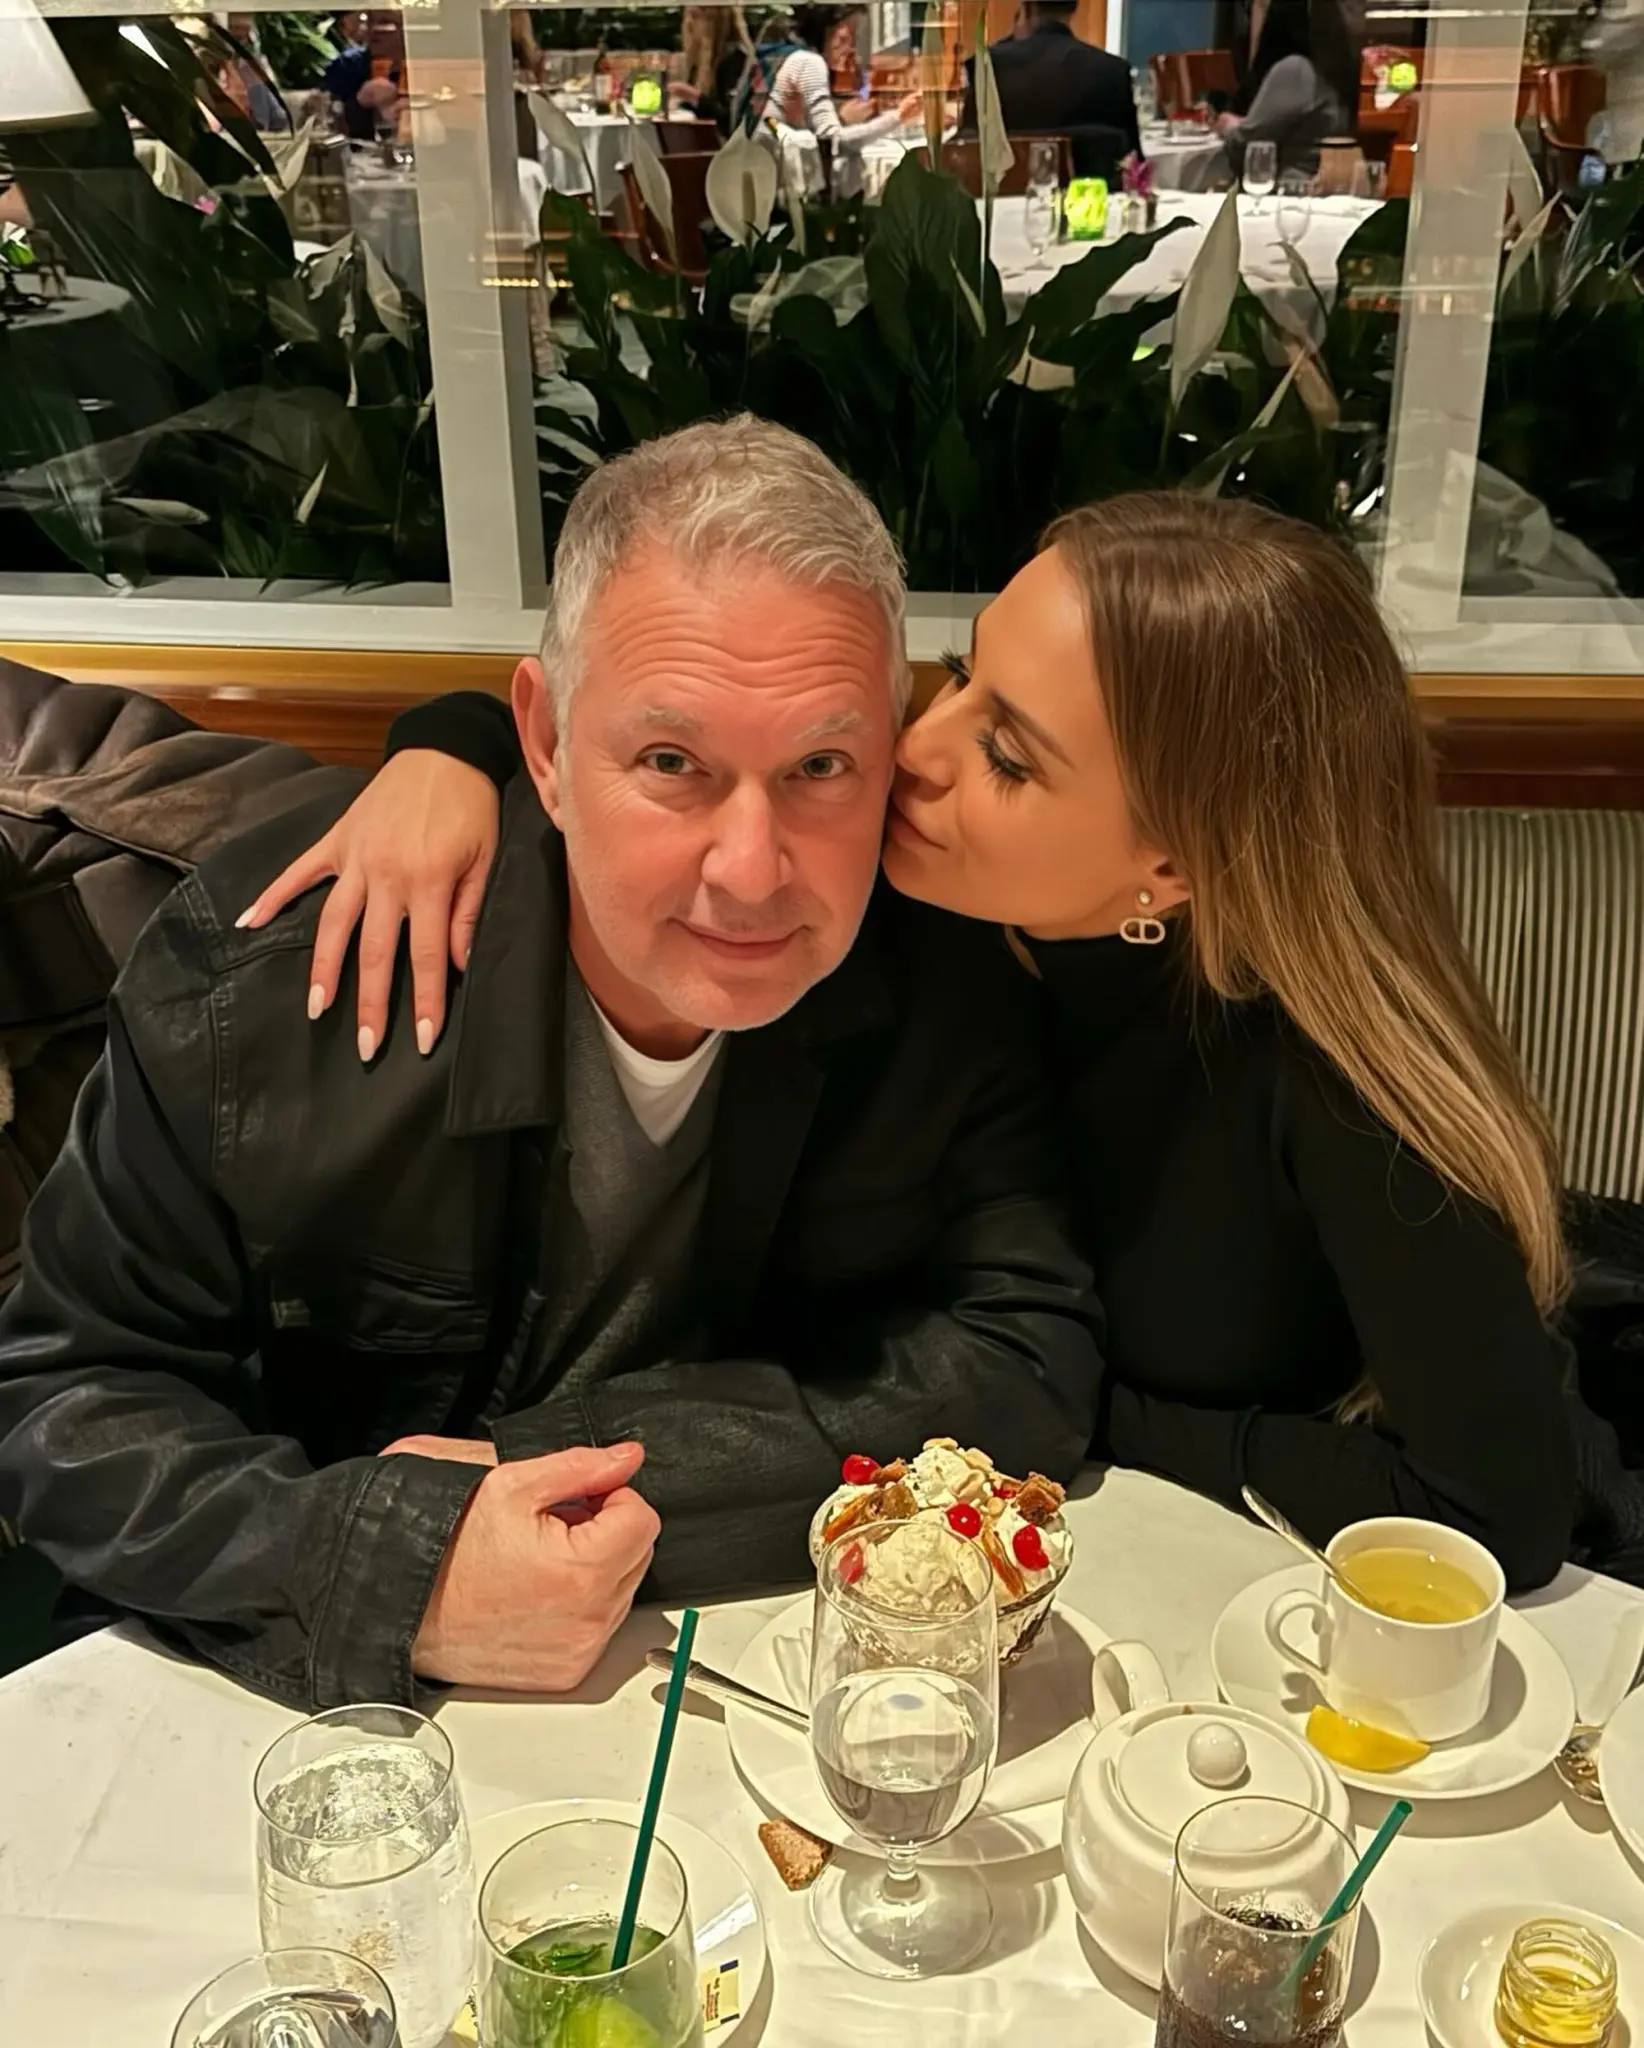 Can You Believe This? Dorit and PK Kemsley Dine Together Amidst Shocking Separation News!